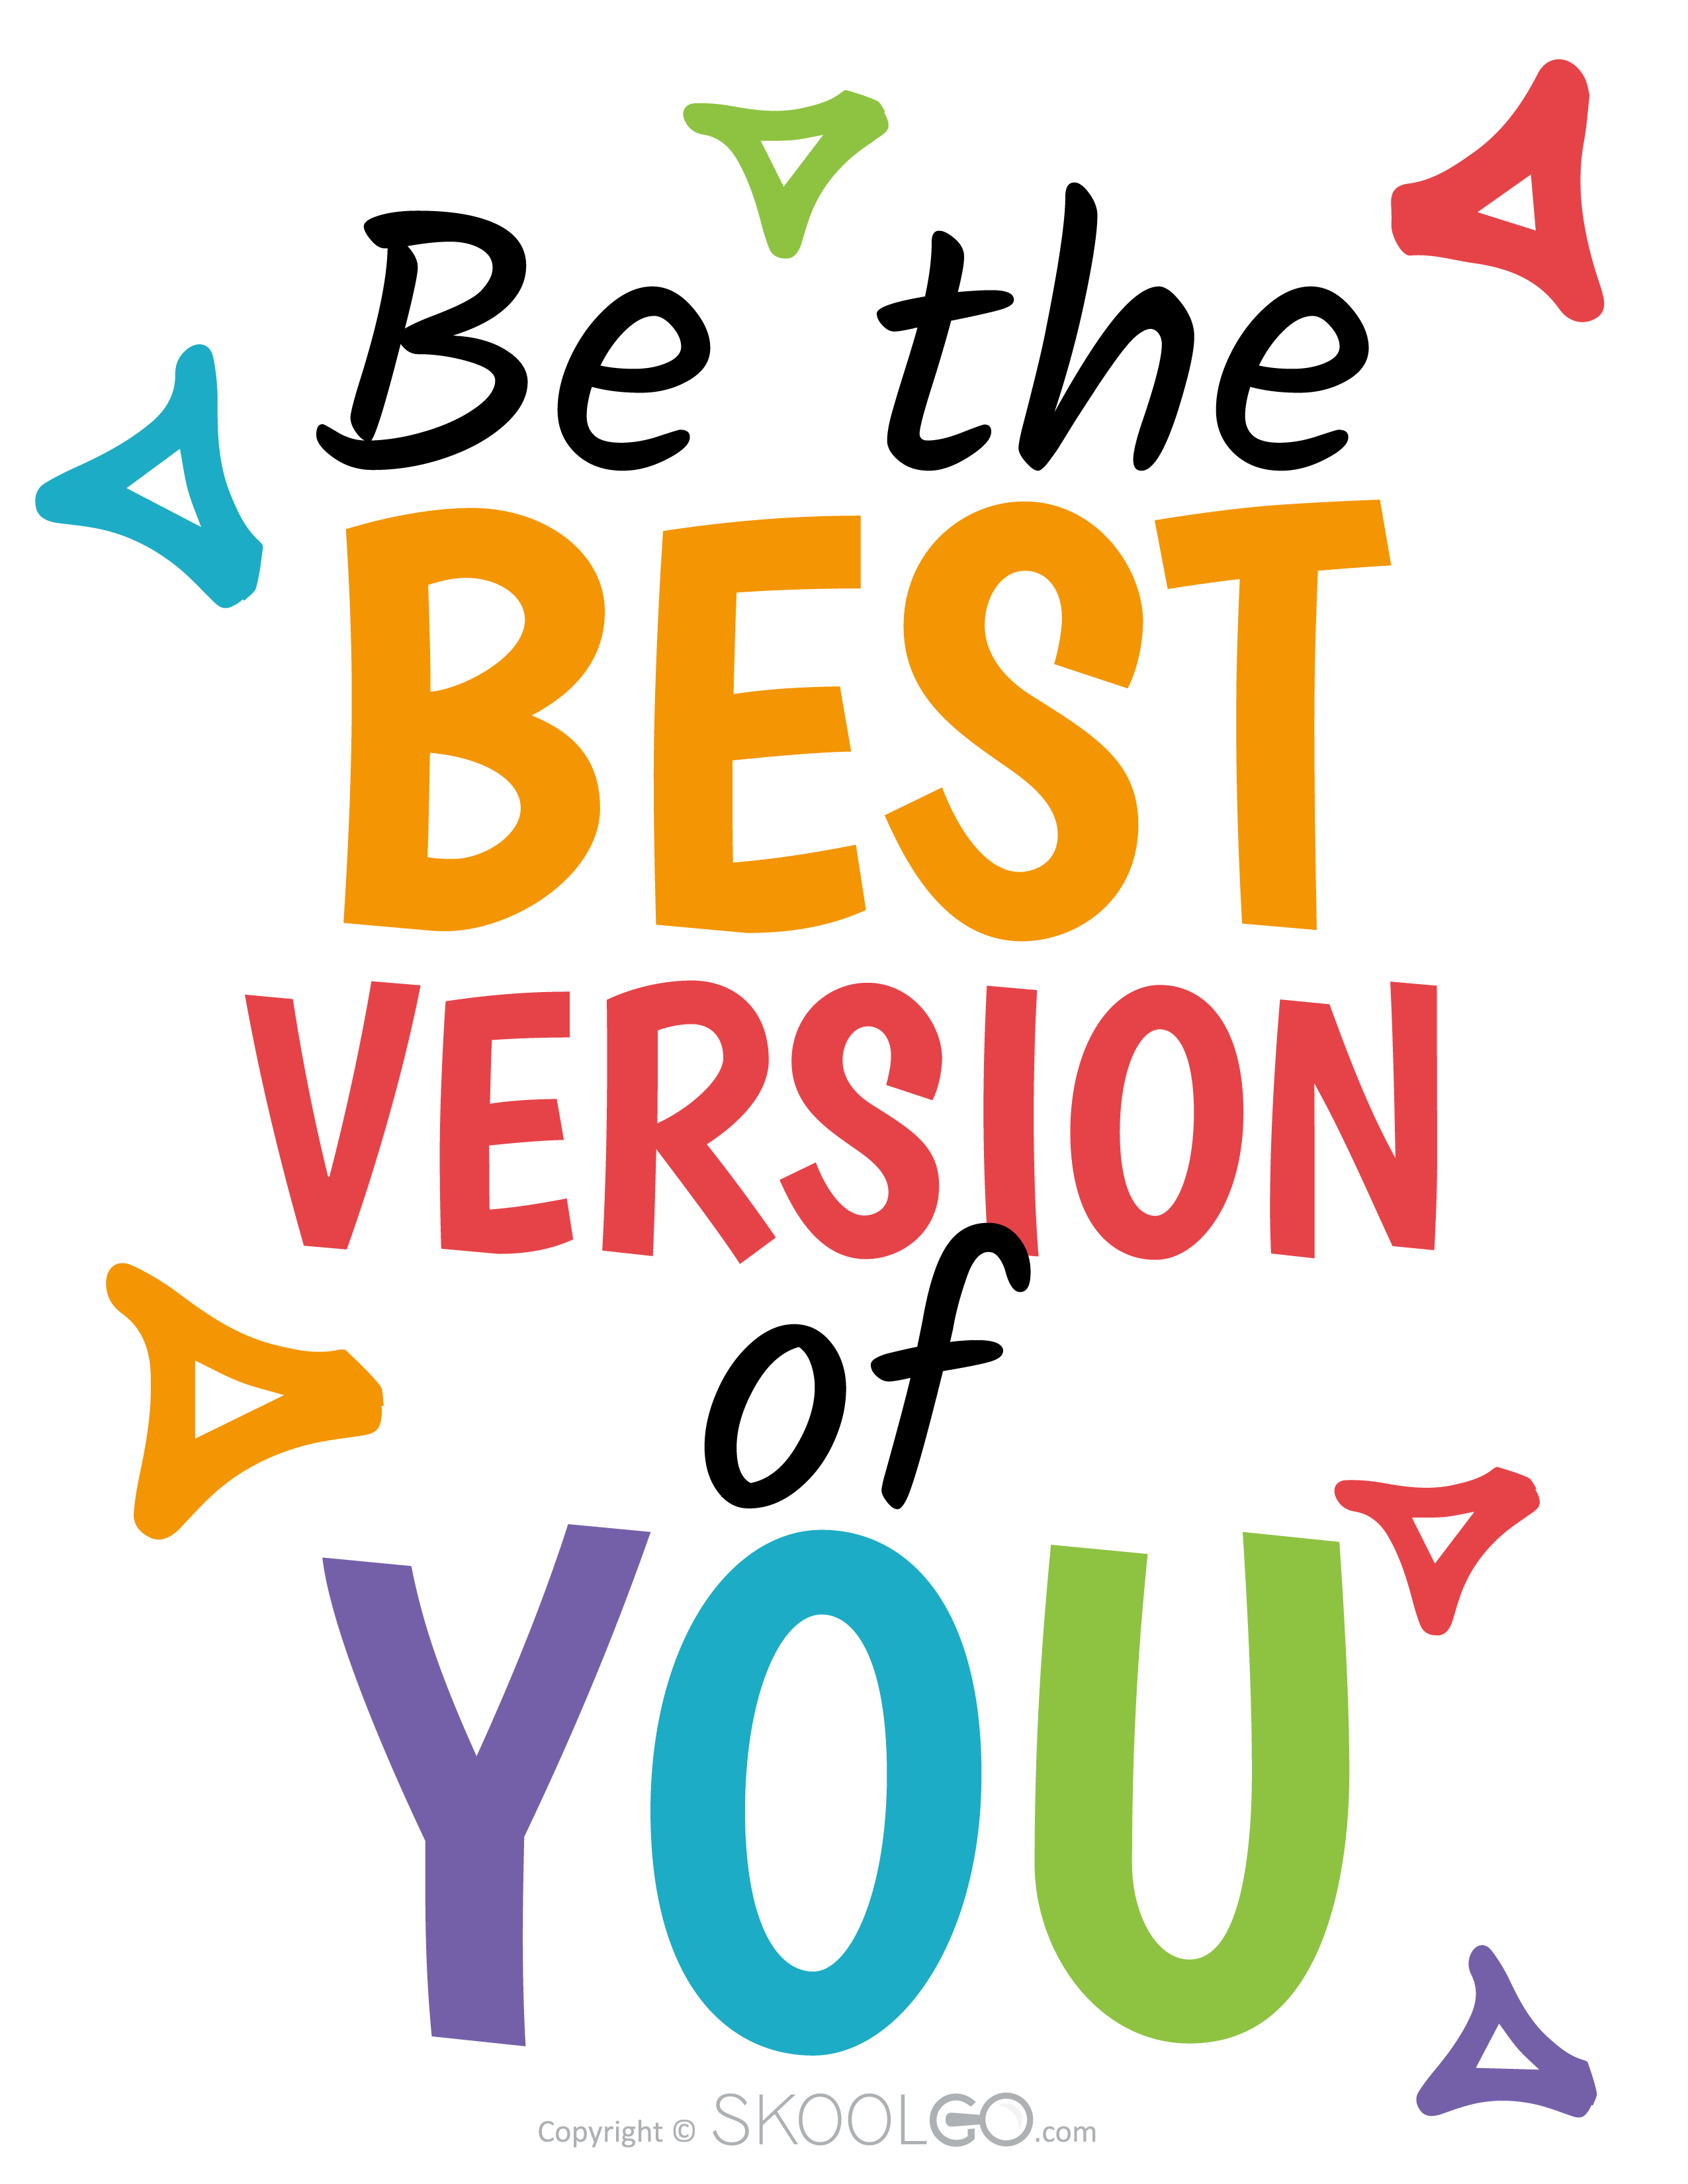 Be The Best Version Of You - Free Poster